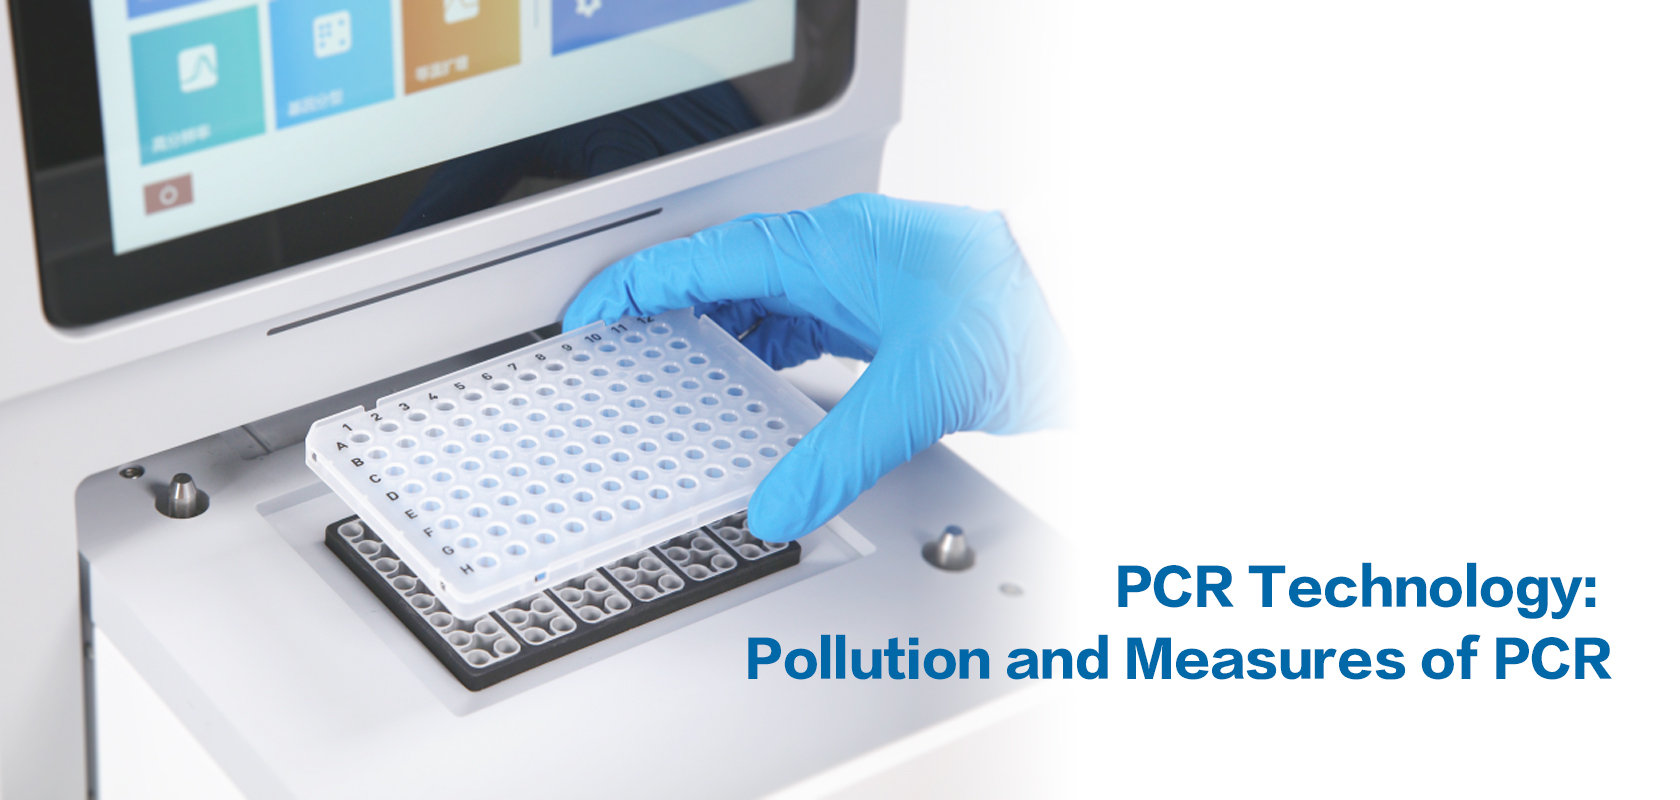 PCR Technology: Pollution and Measures of PCR